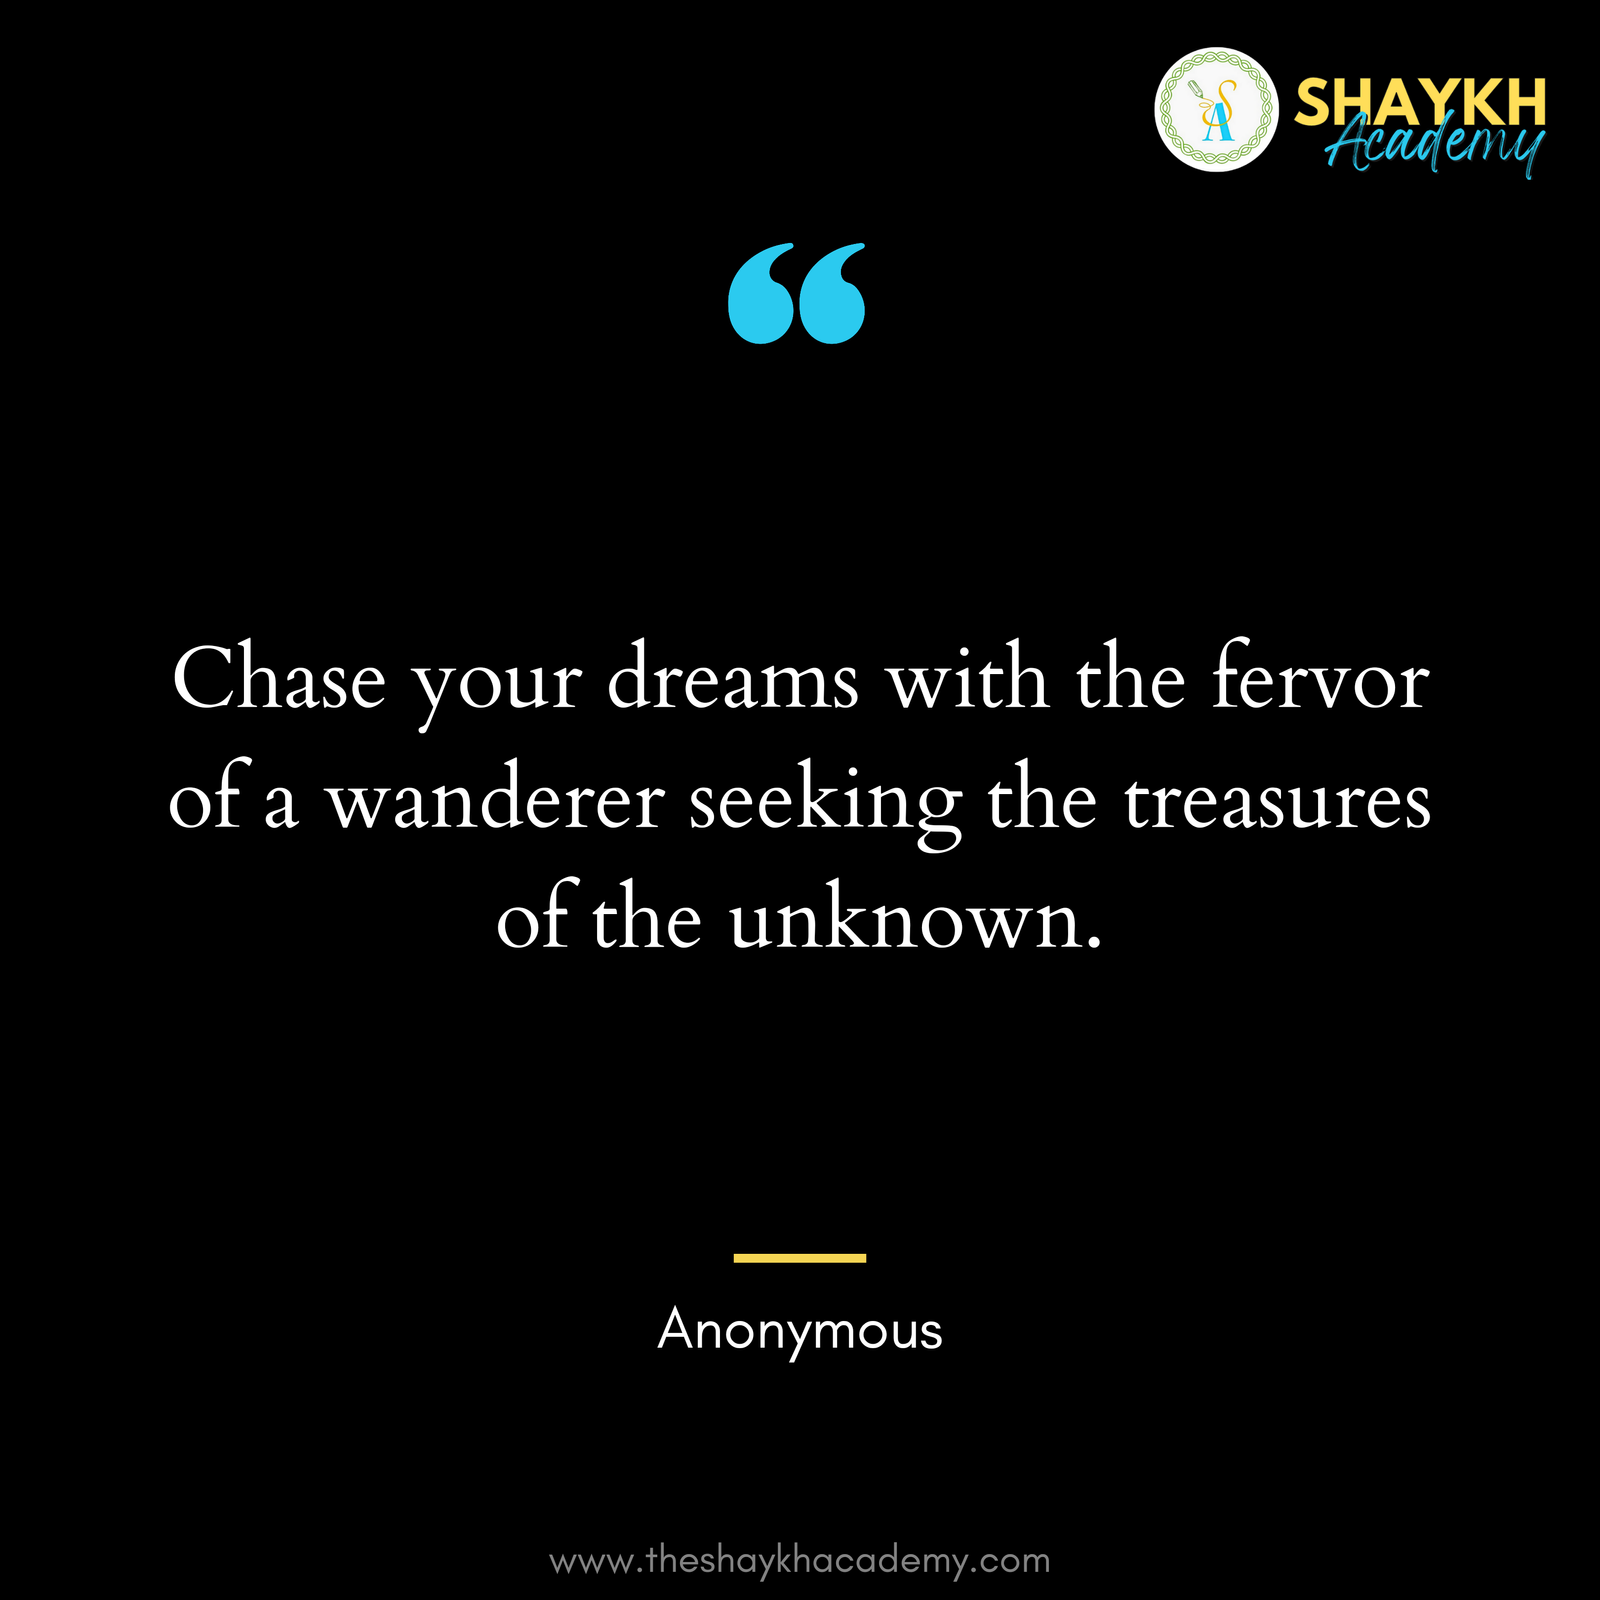 Chase your dreams with the fervor of a wanderer seeking the treasures of the unknown.